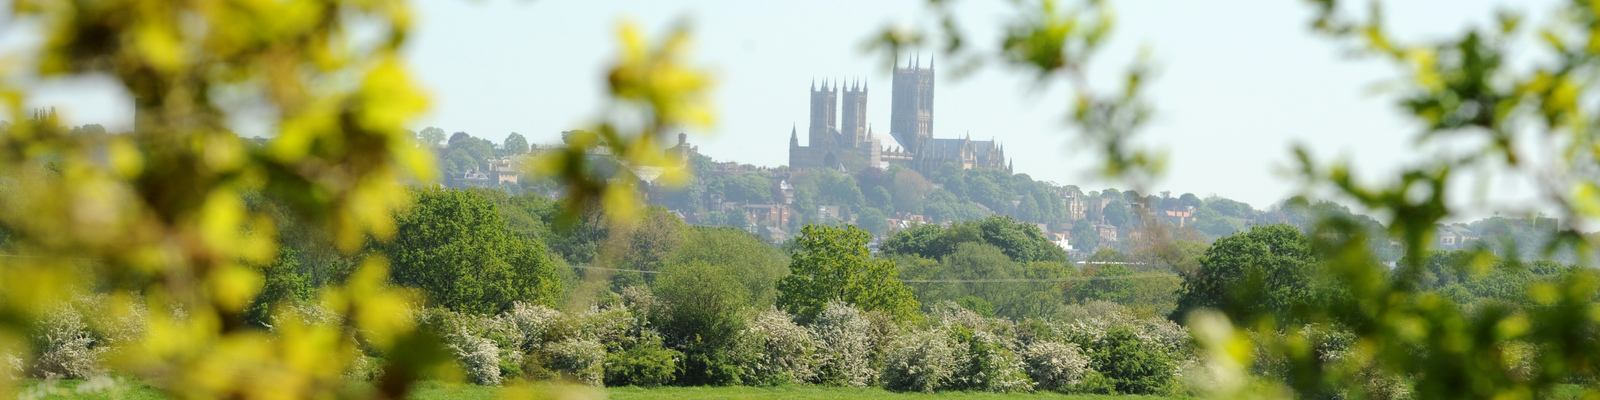 Lincoln Cathedral seen through trees